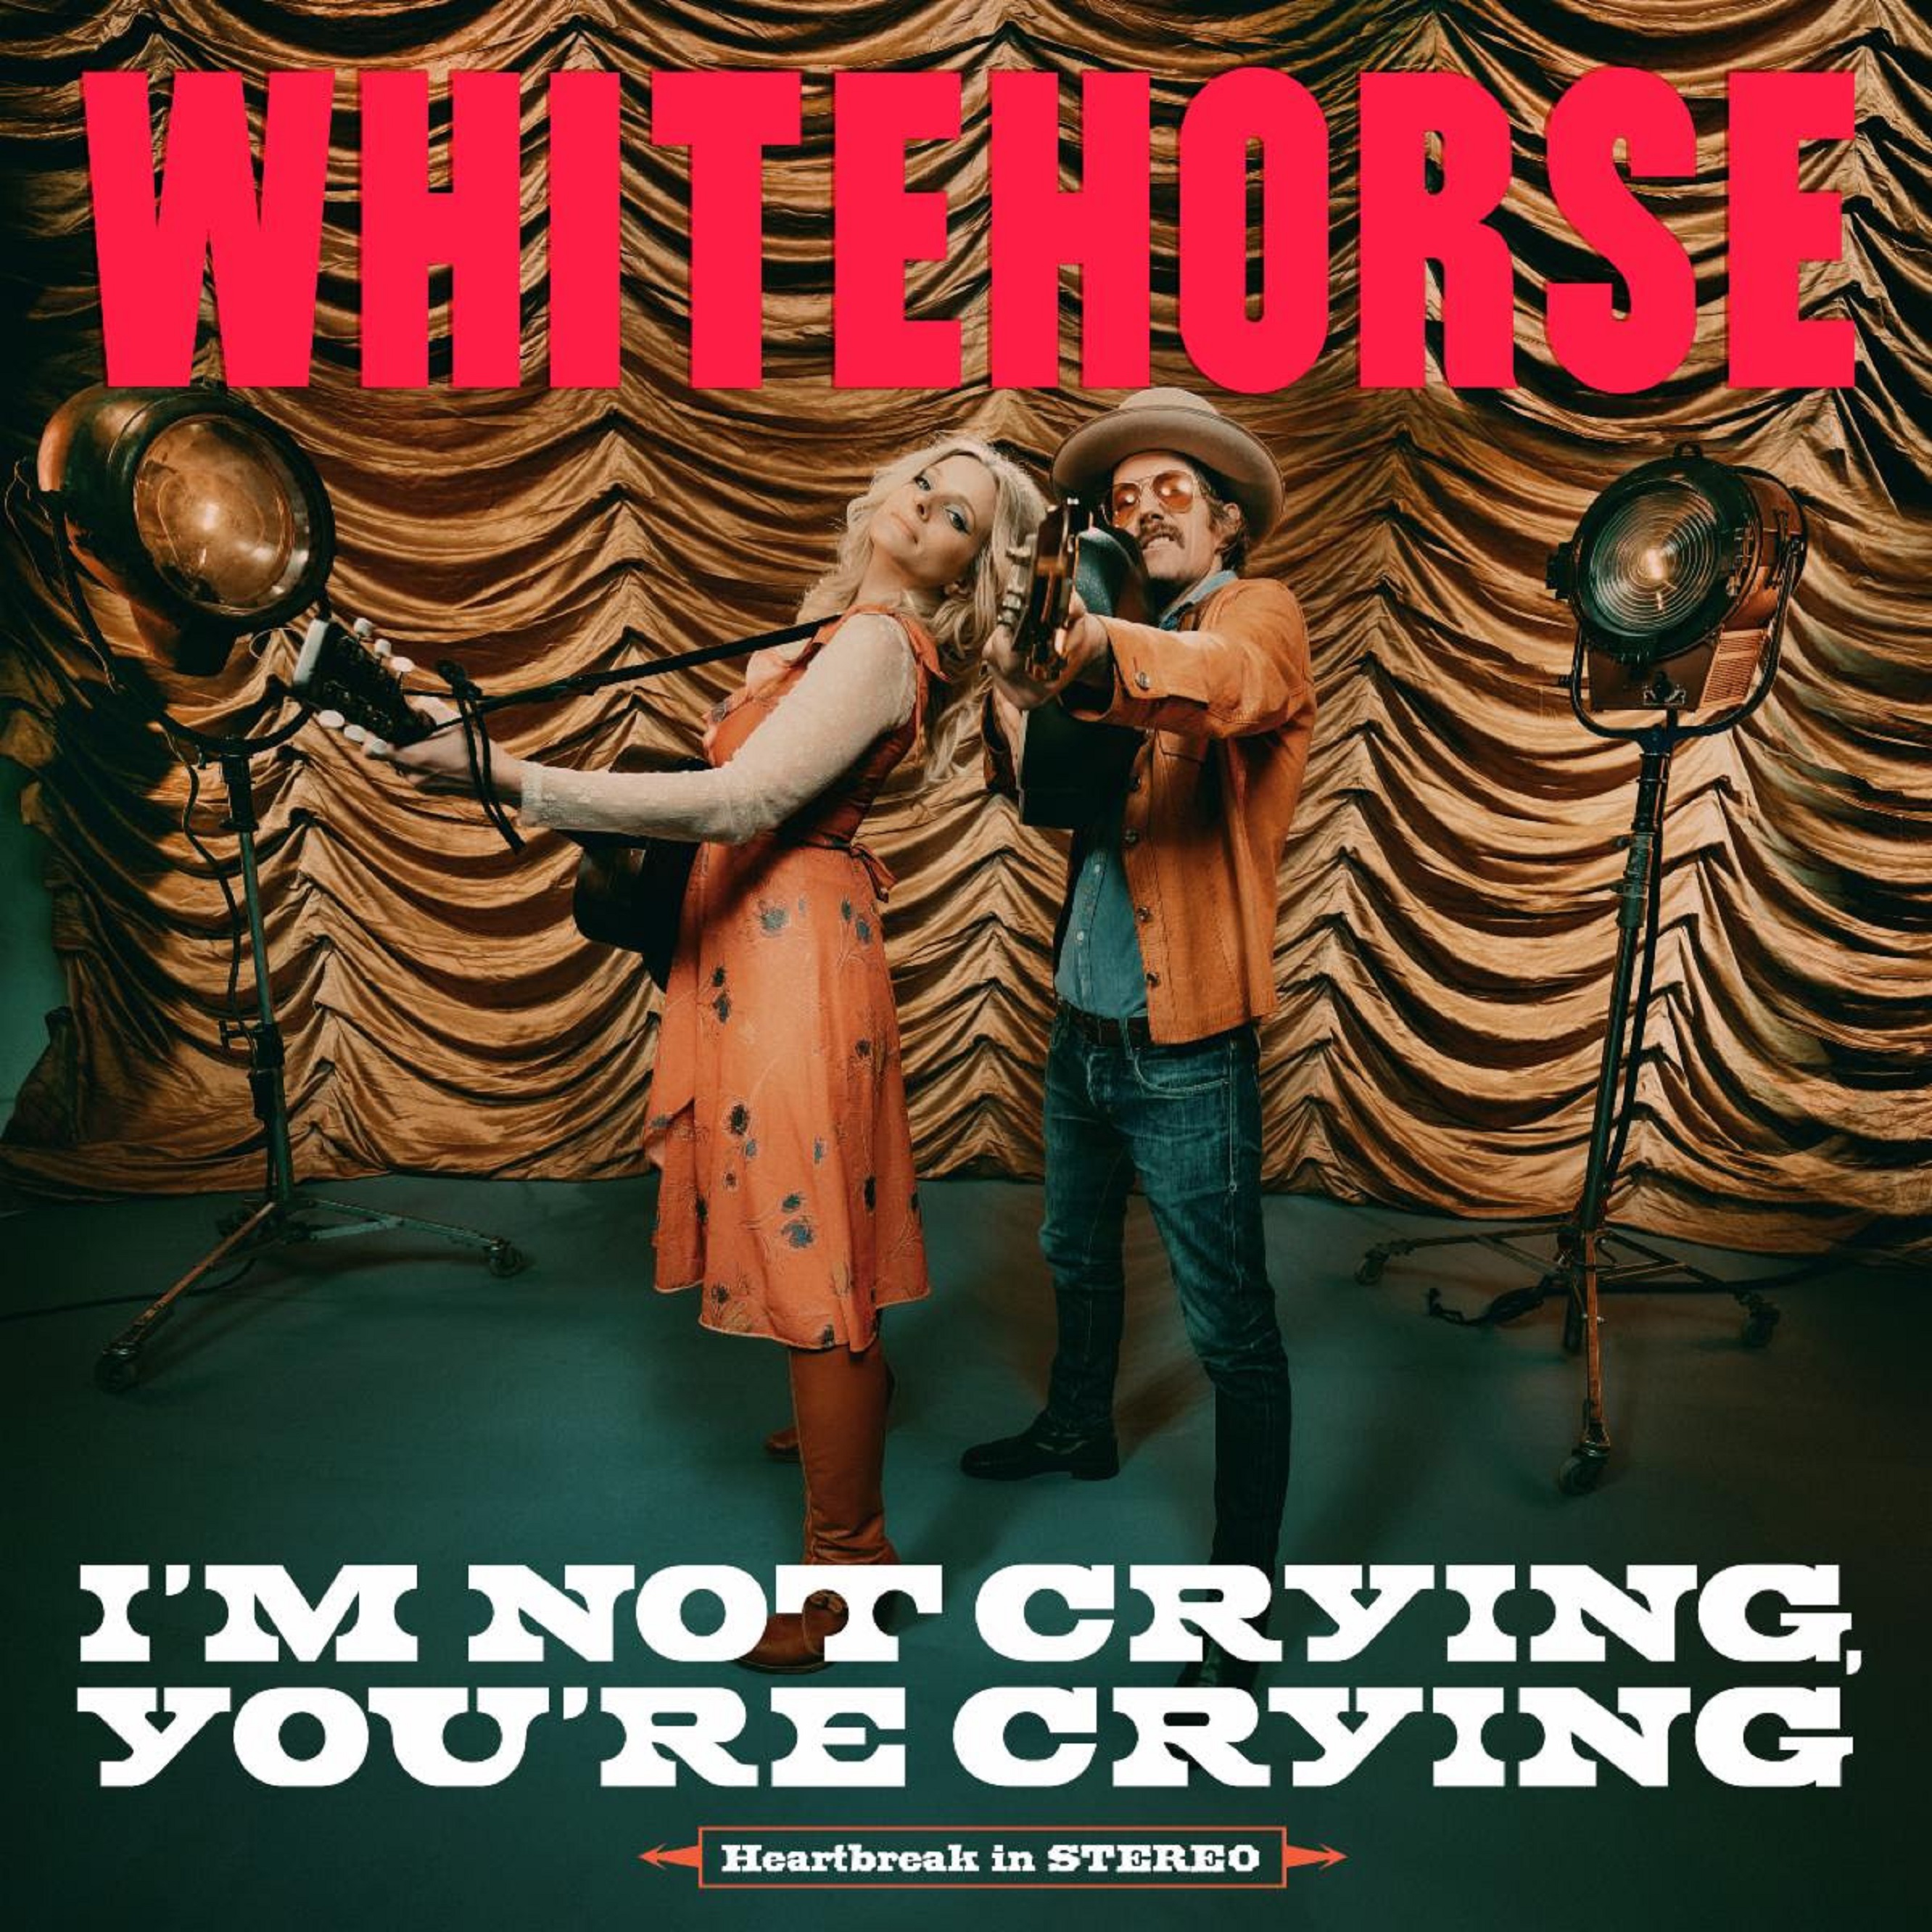 Whitehorse Put A Nimble Classic Country Twist On Their New Album "I'm Not Crying, You're Crying"